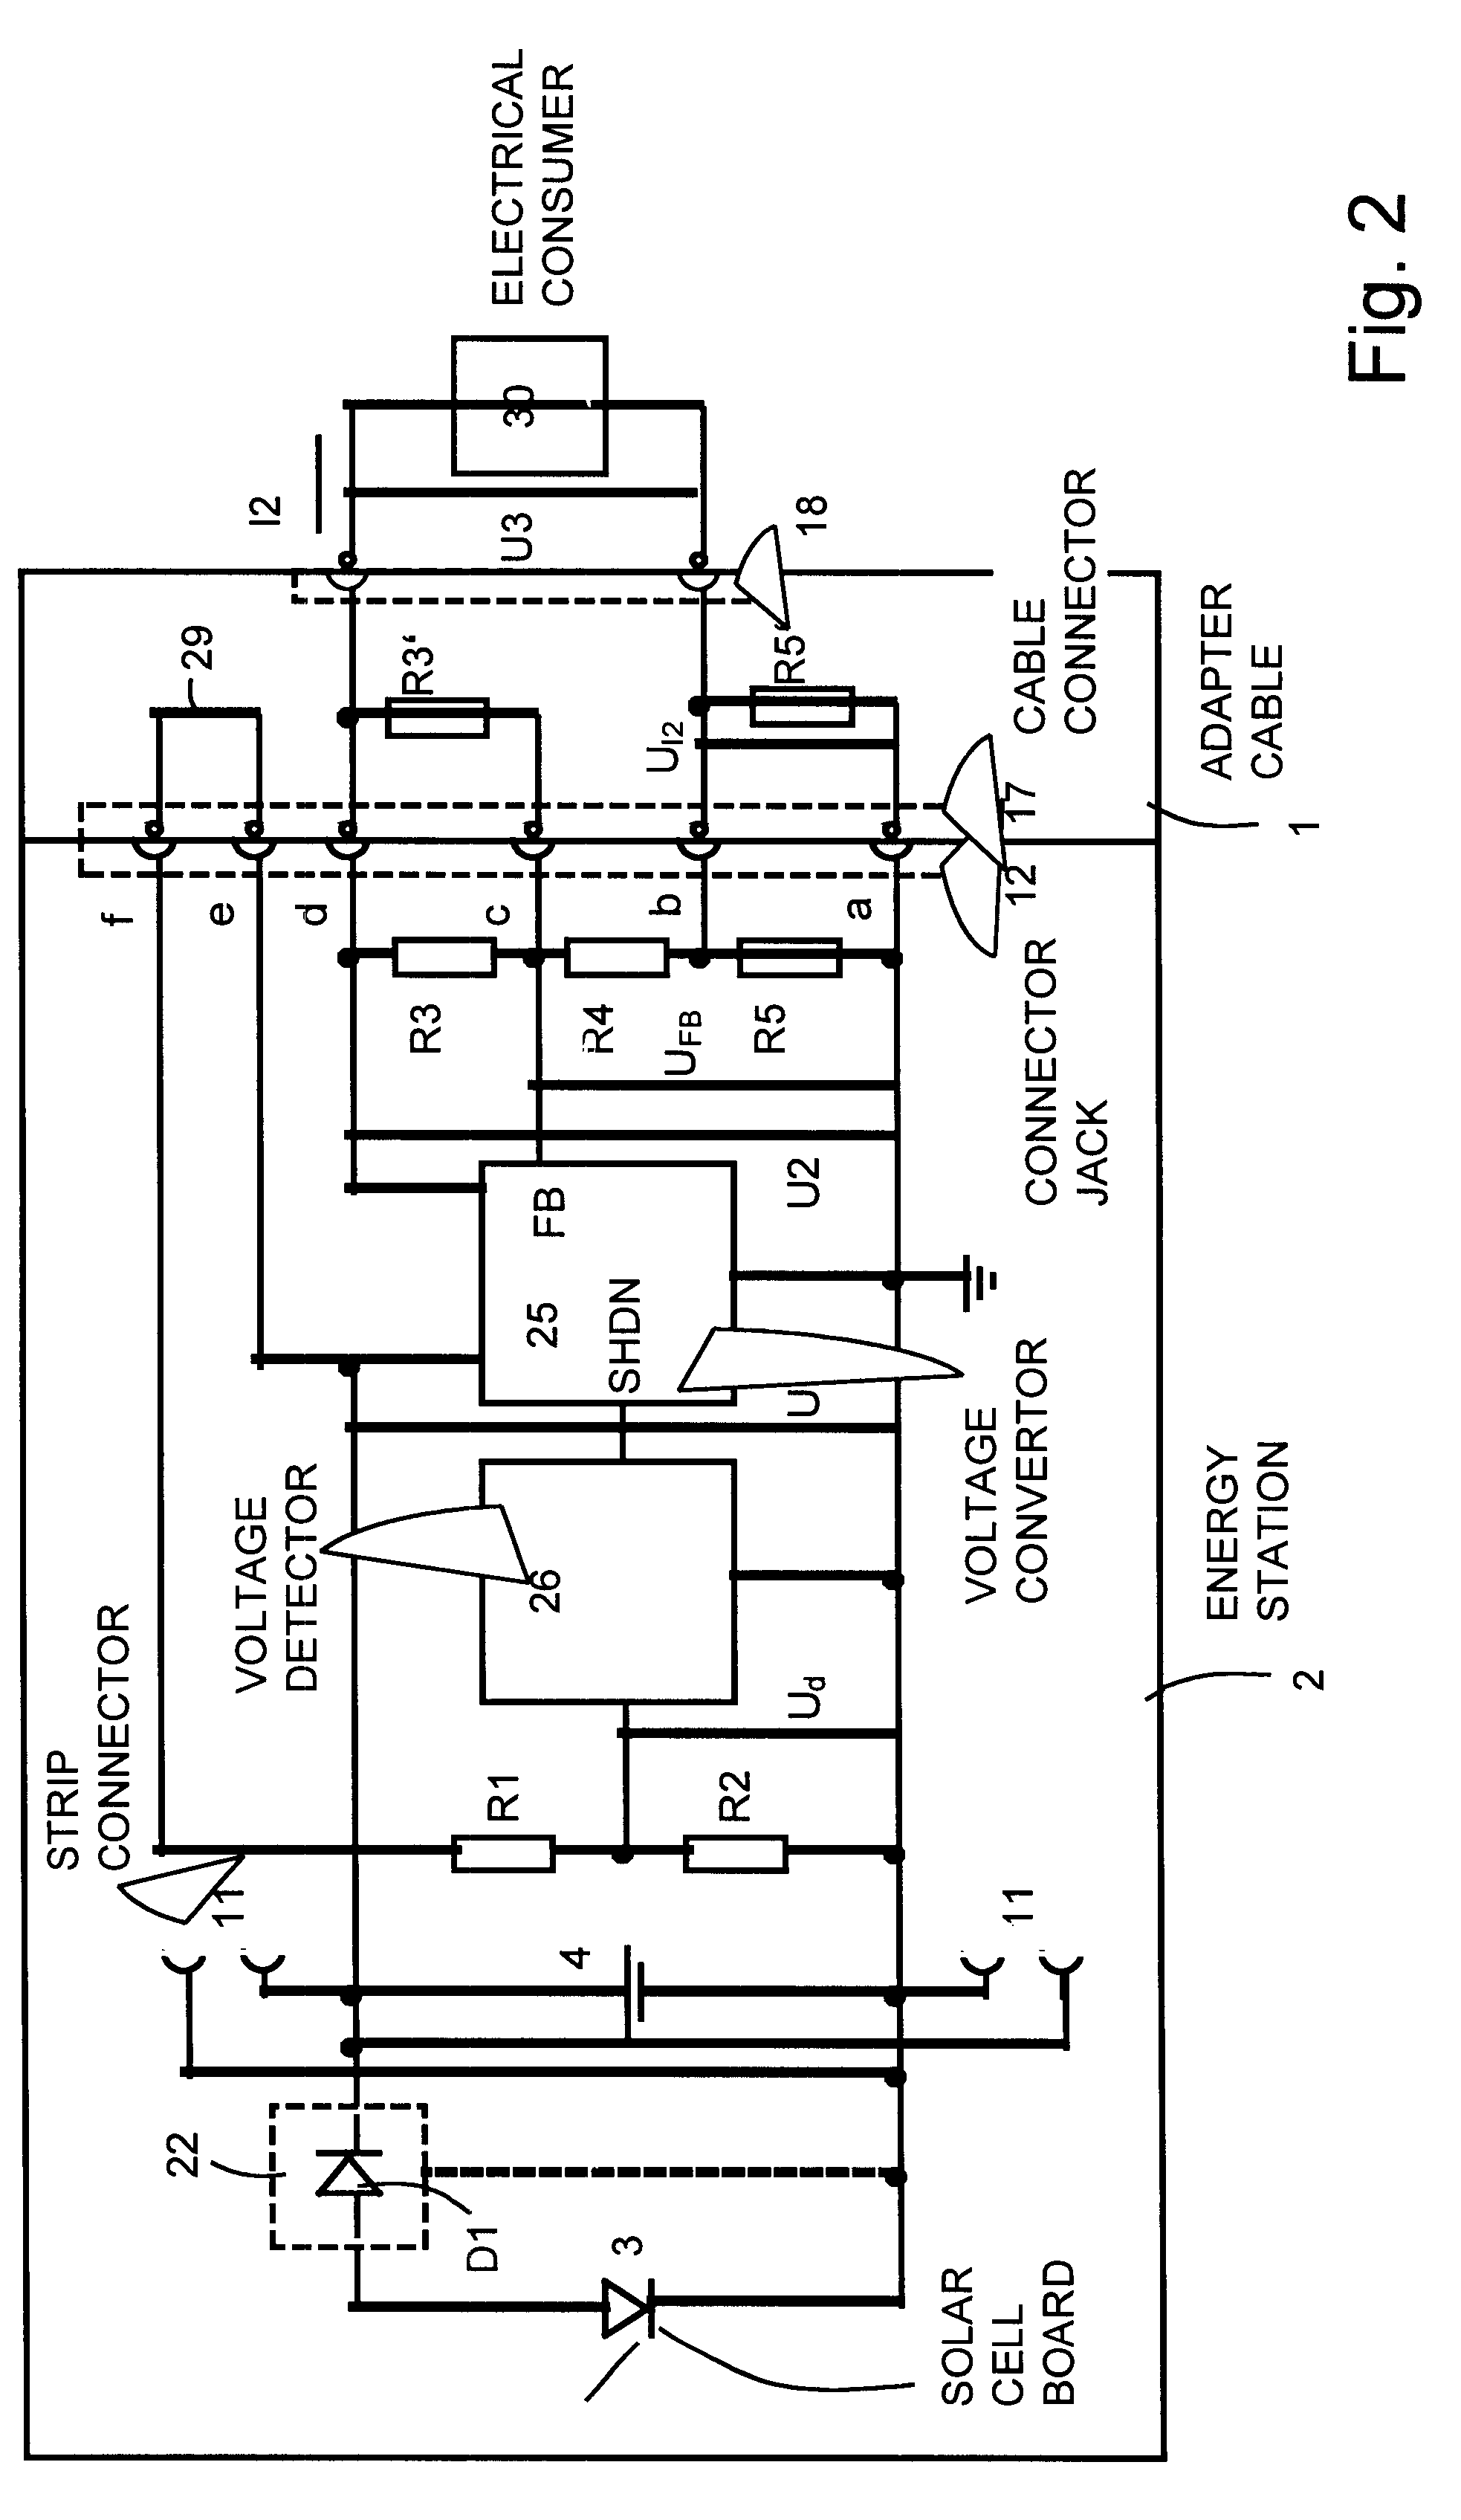 Universal power supply for different small electrical devices